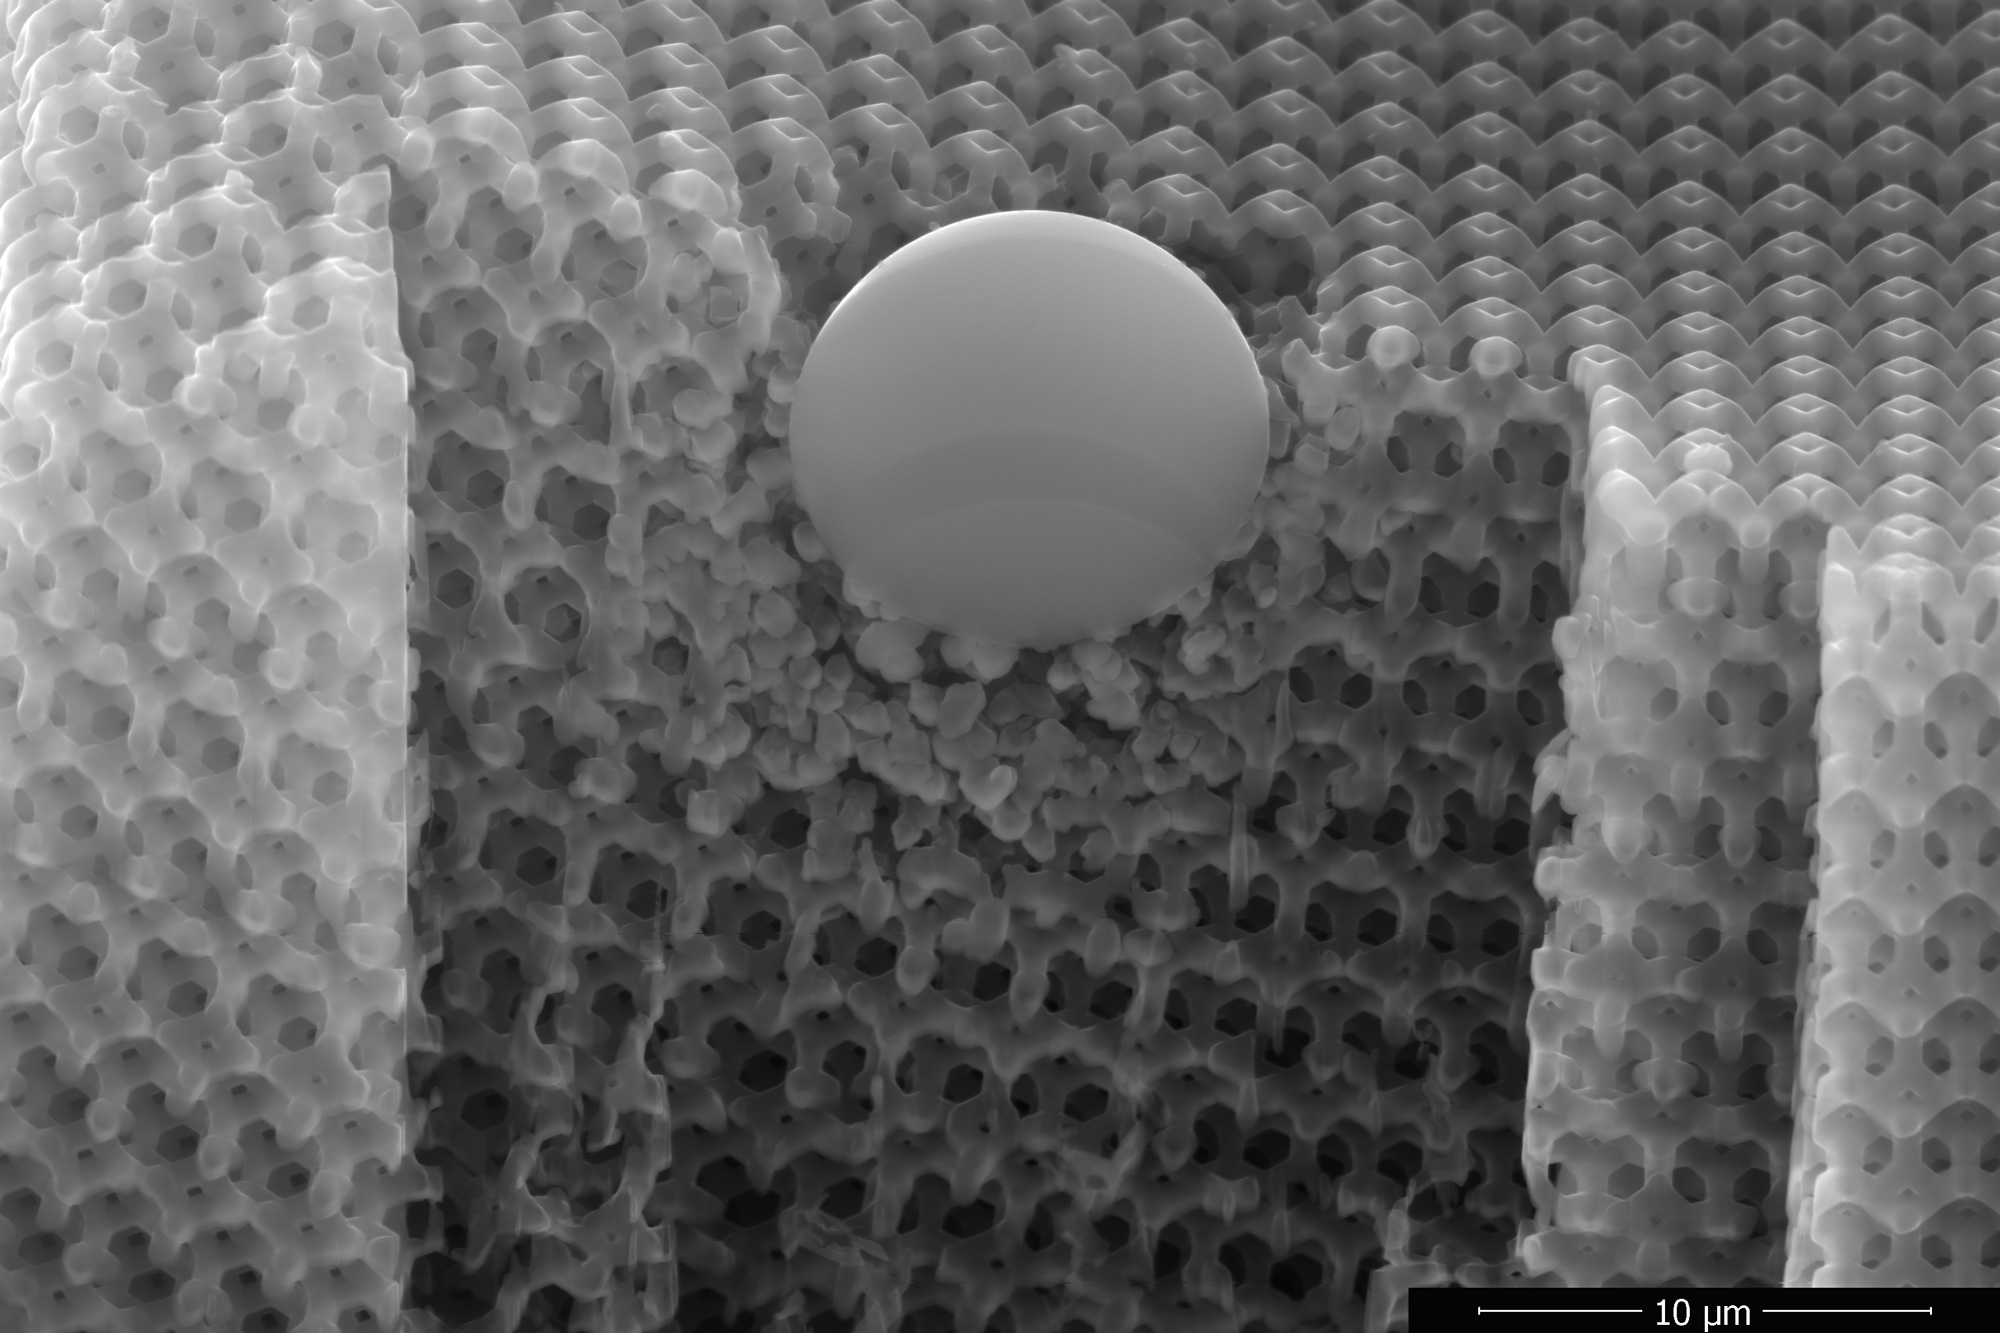 Close-up of silicon oxide 'bullet' embedded in the carbon material